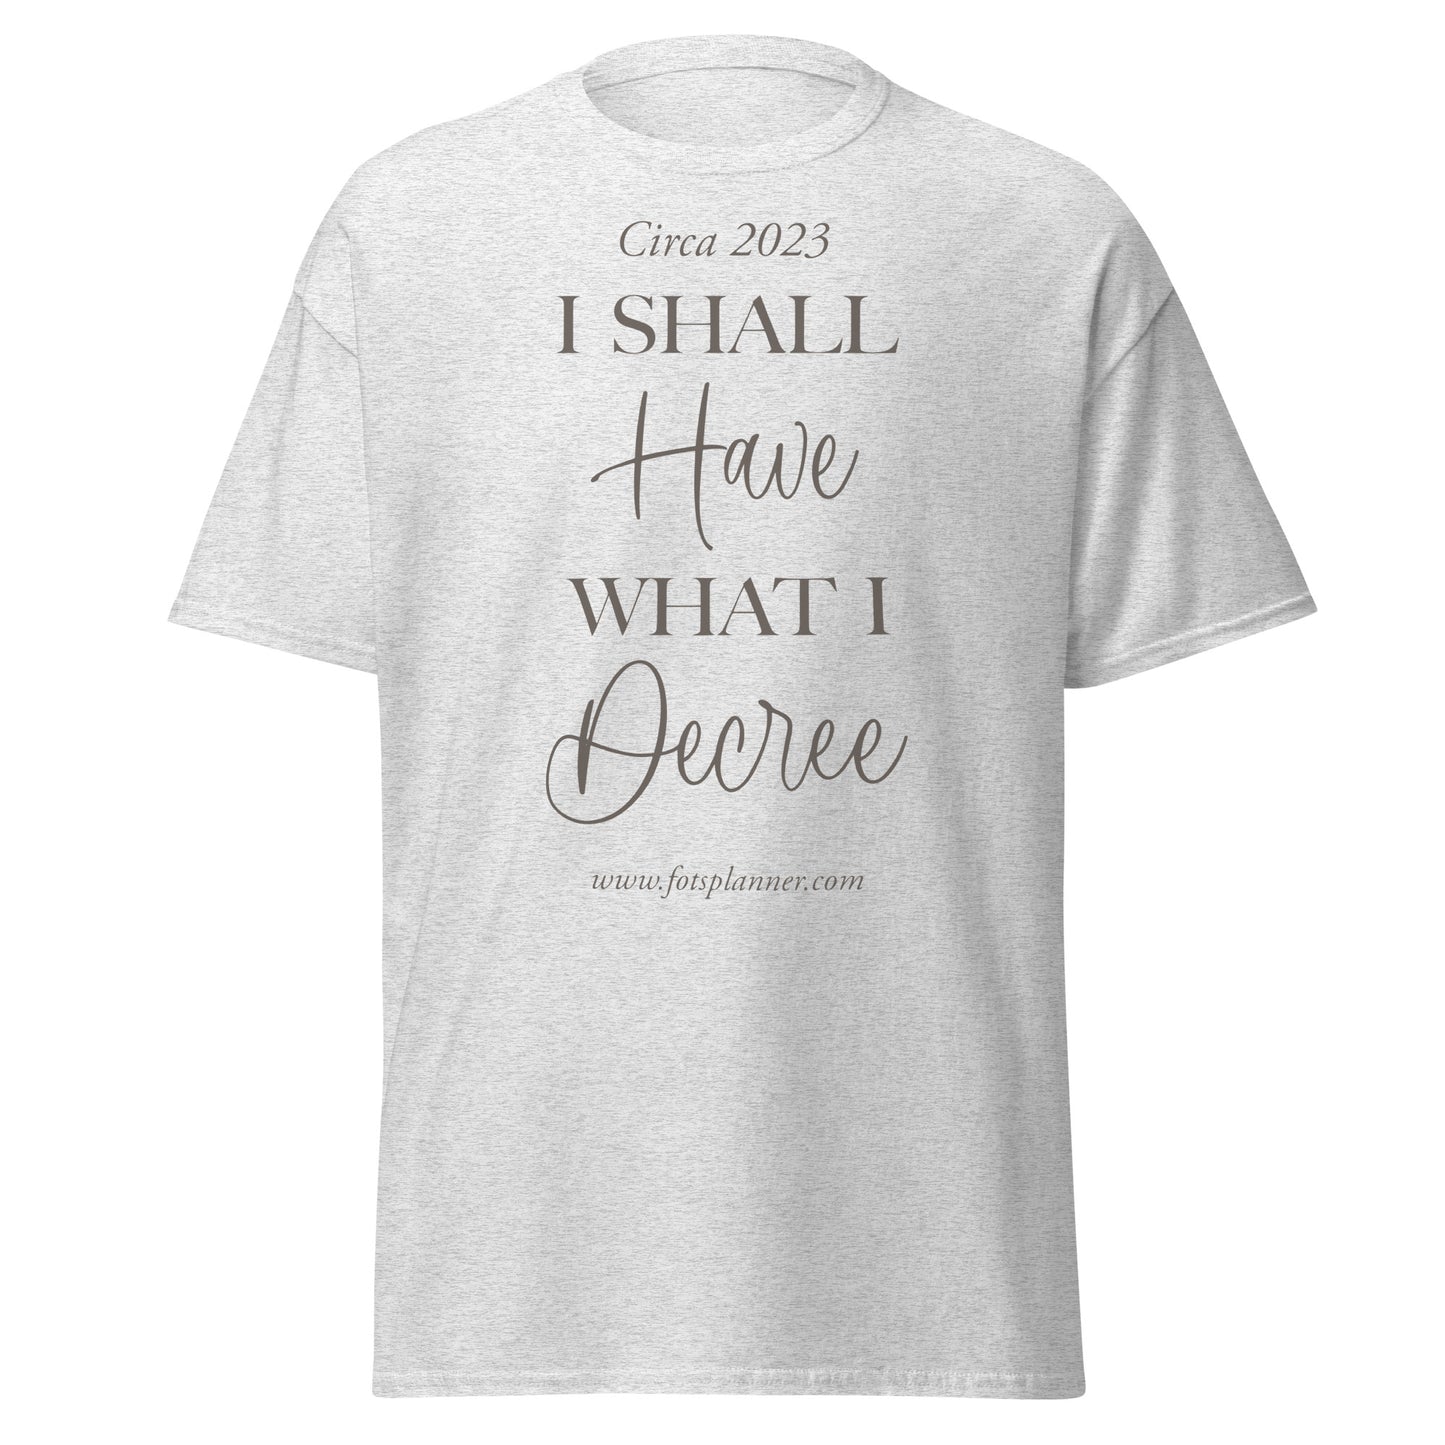 I Shall Have What I Decree Women's Tee